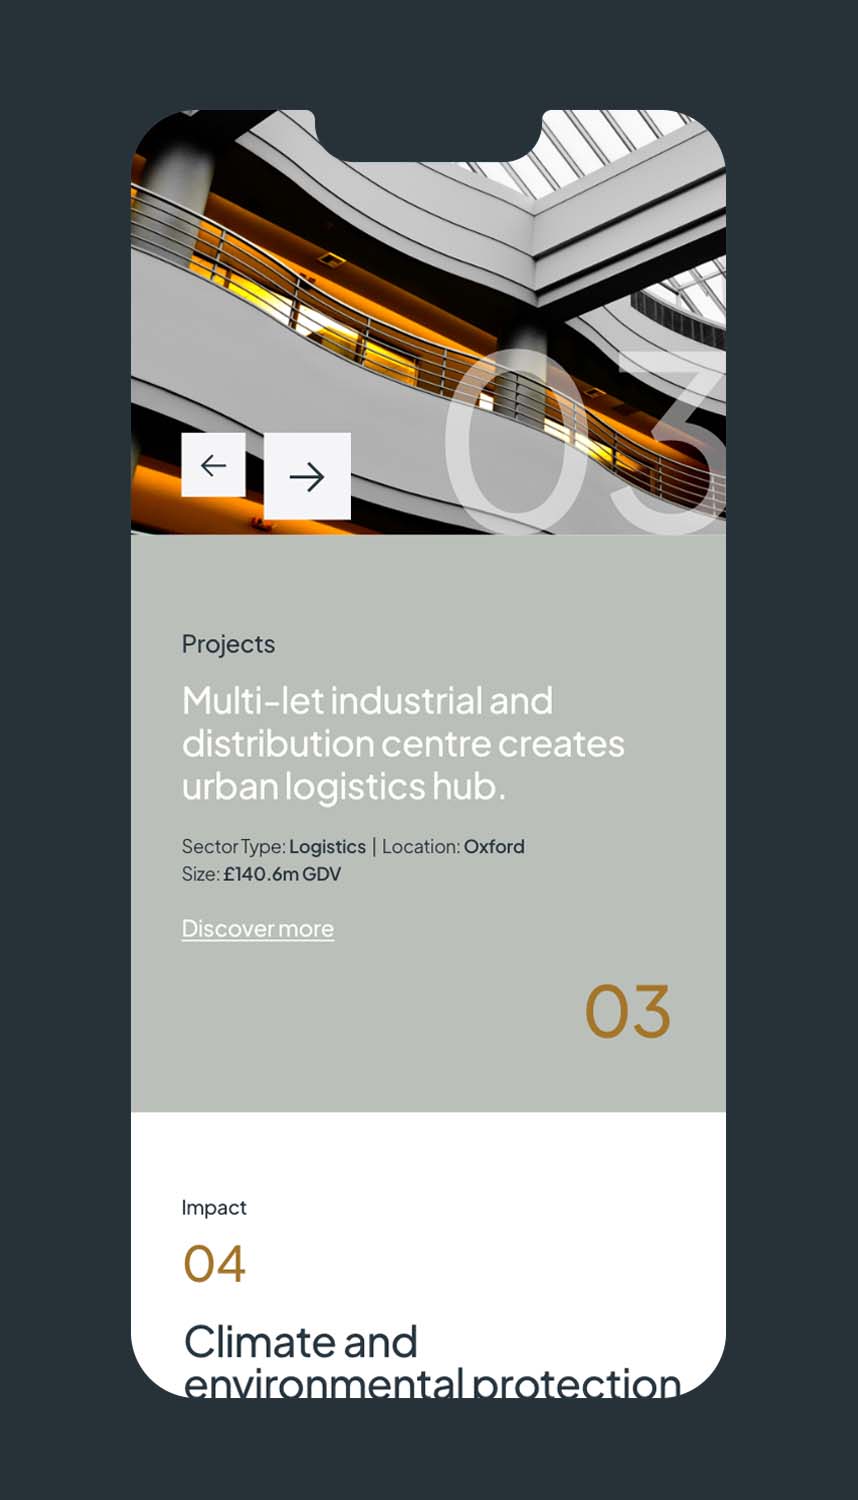 Harleyford Capital - Private equity web design Mobile Screen 05